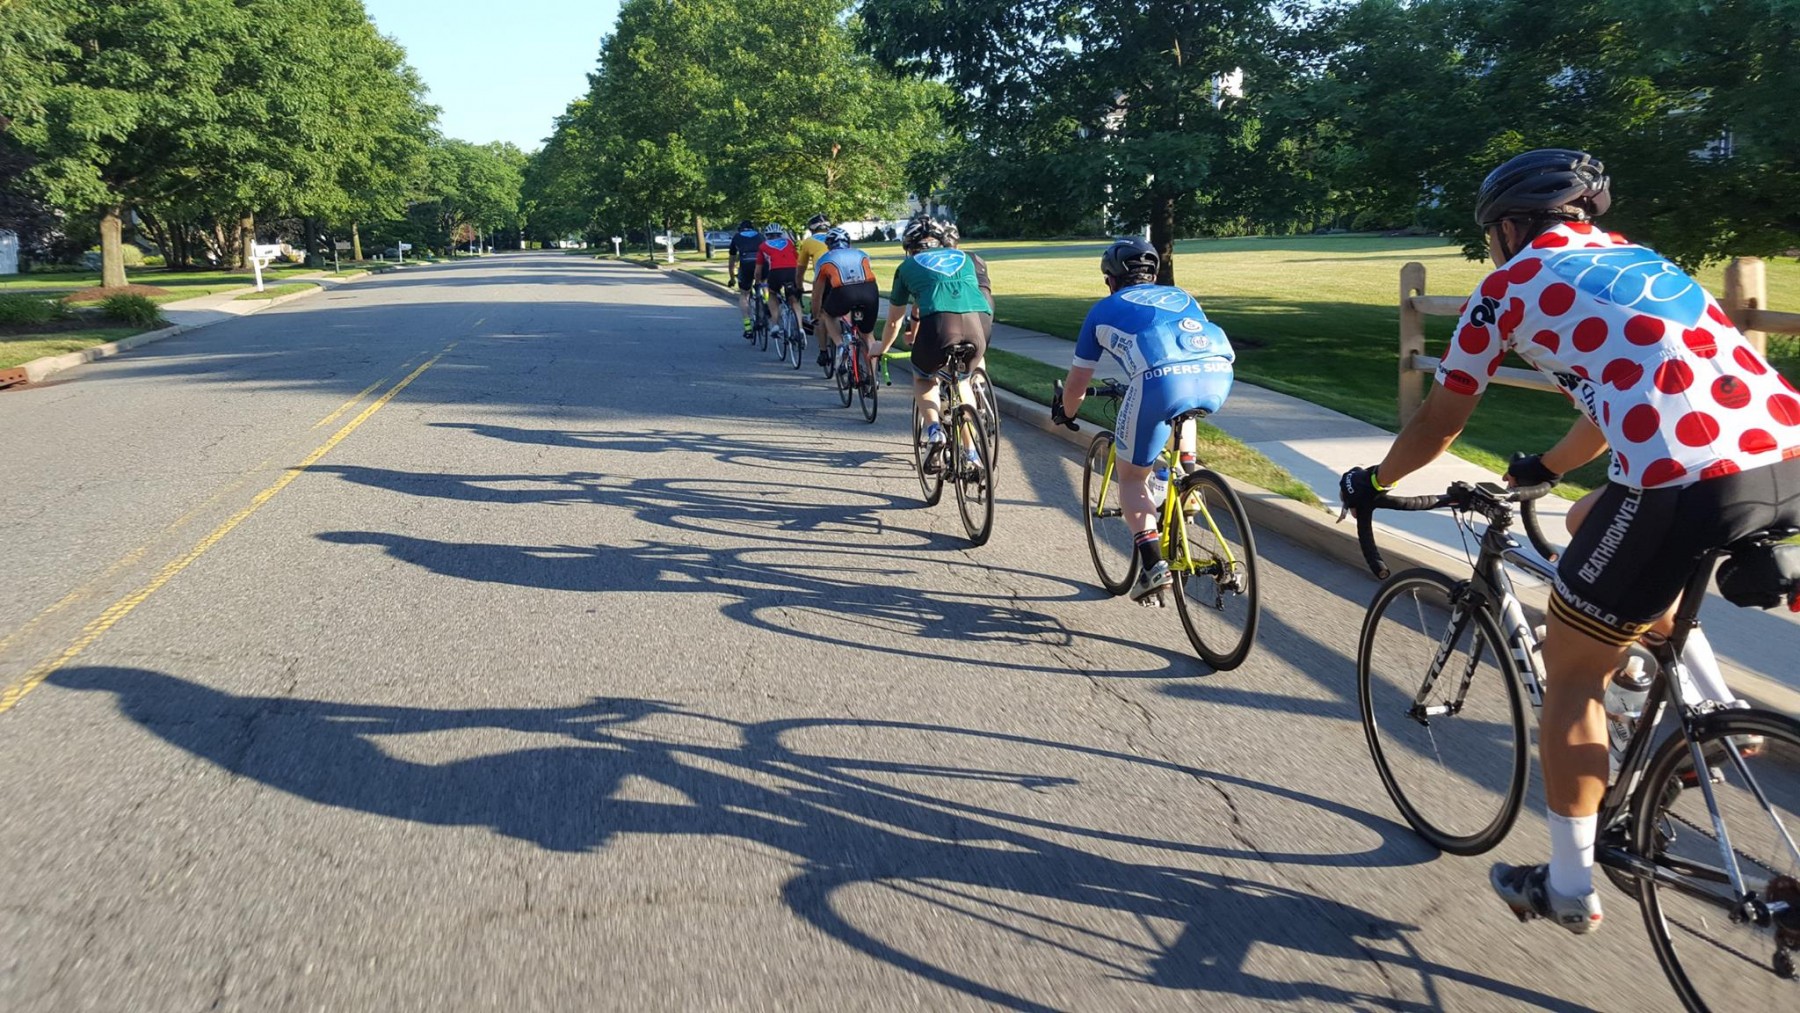 The group exuding awesome form as they roll through Pompton Plains.